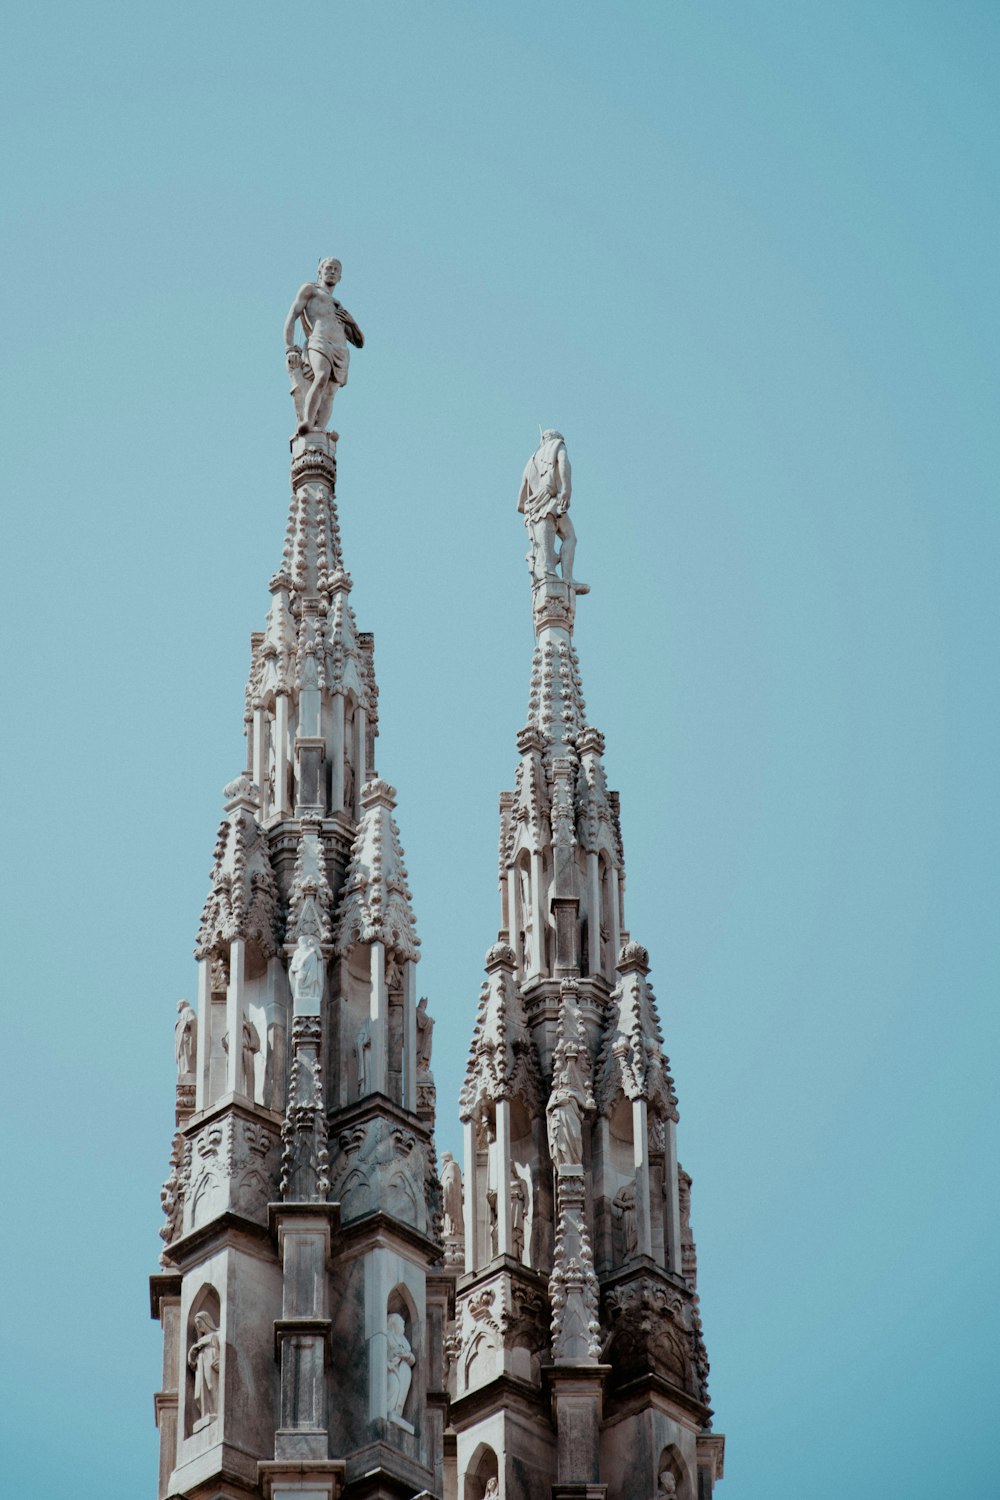 a tall building with statues on top